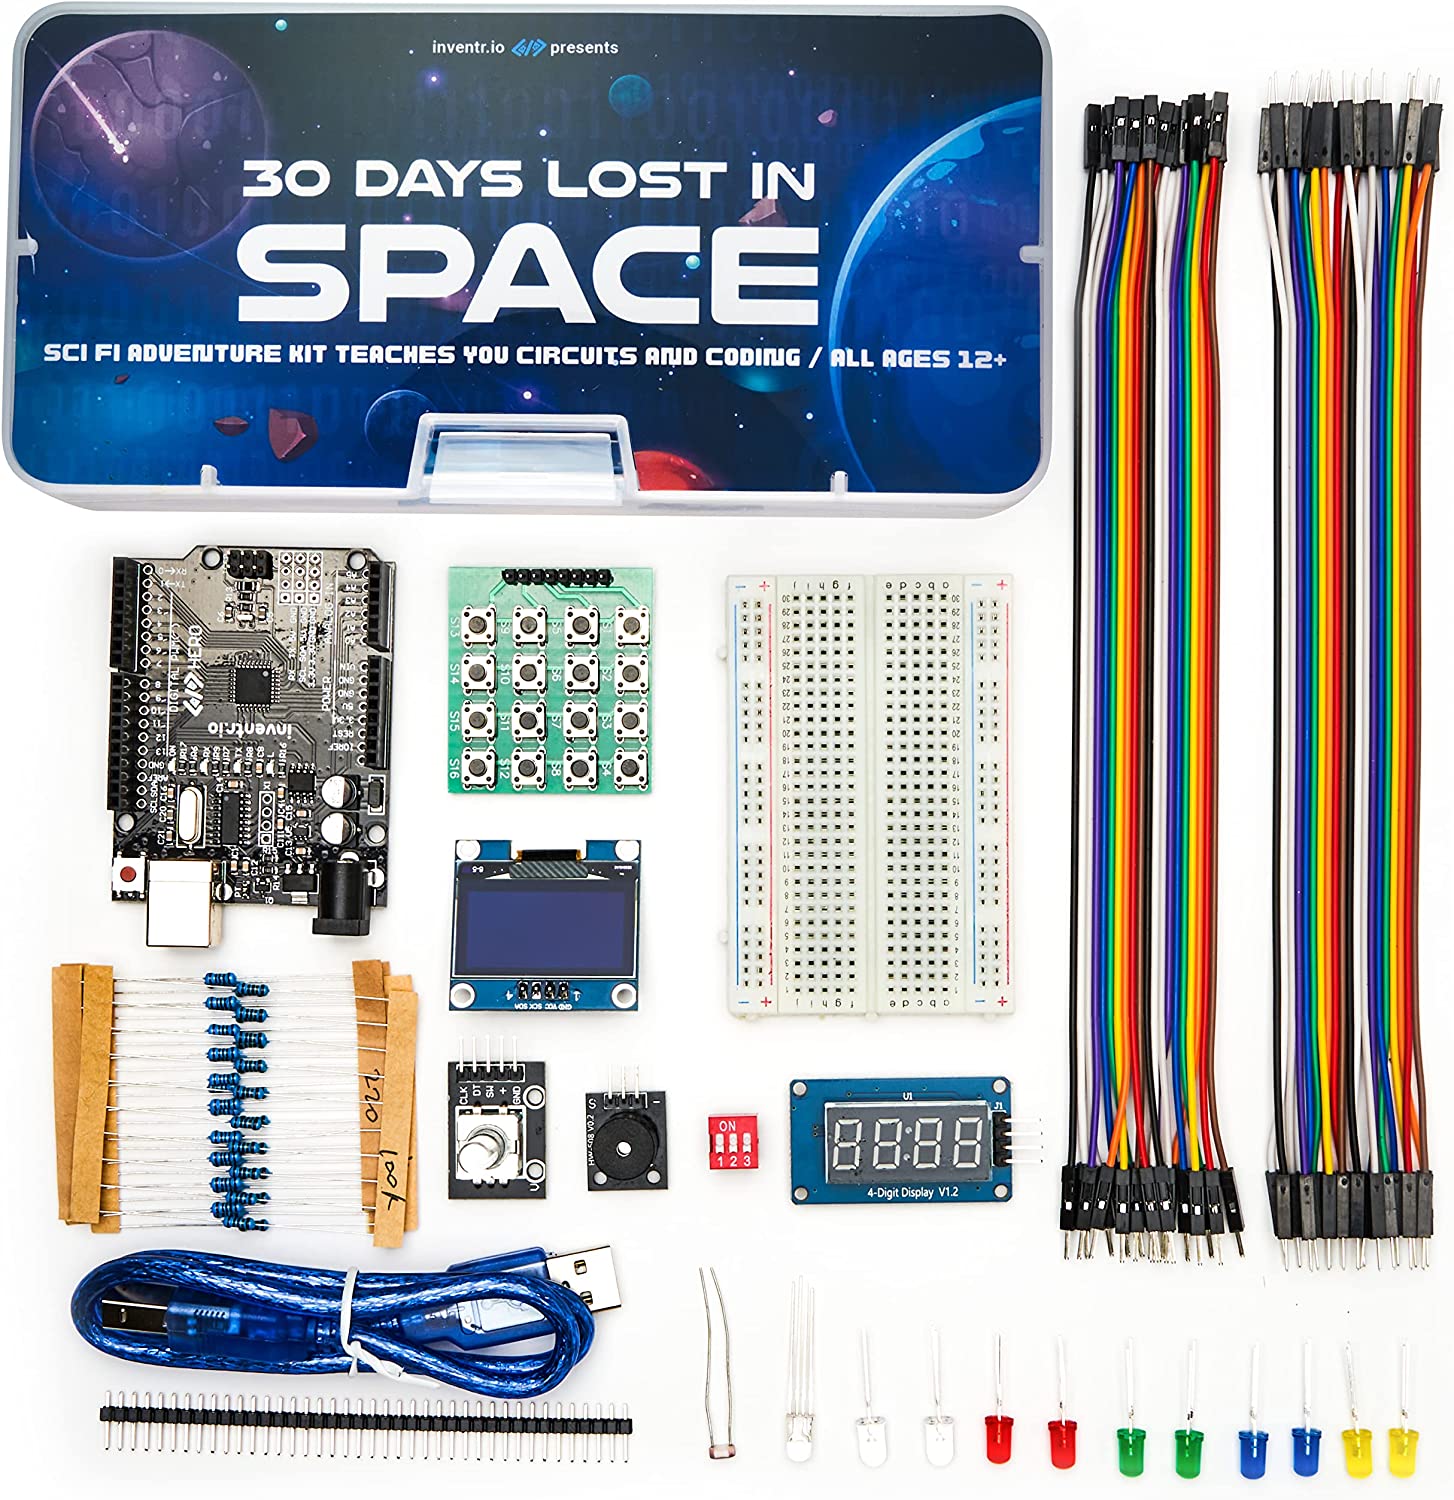 Coding toys have themes like this one called 30 days lost in space. The title is on a space themed box.